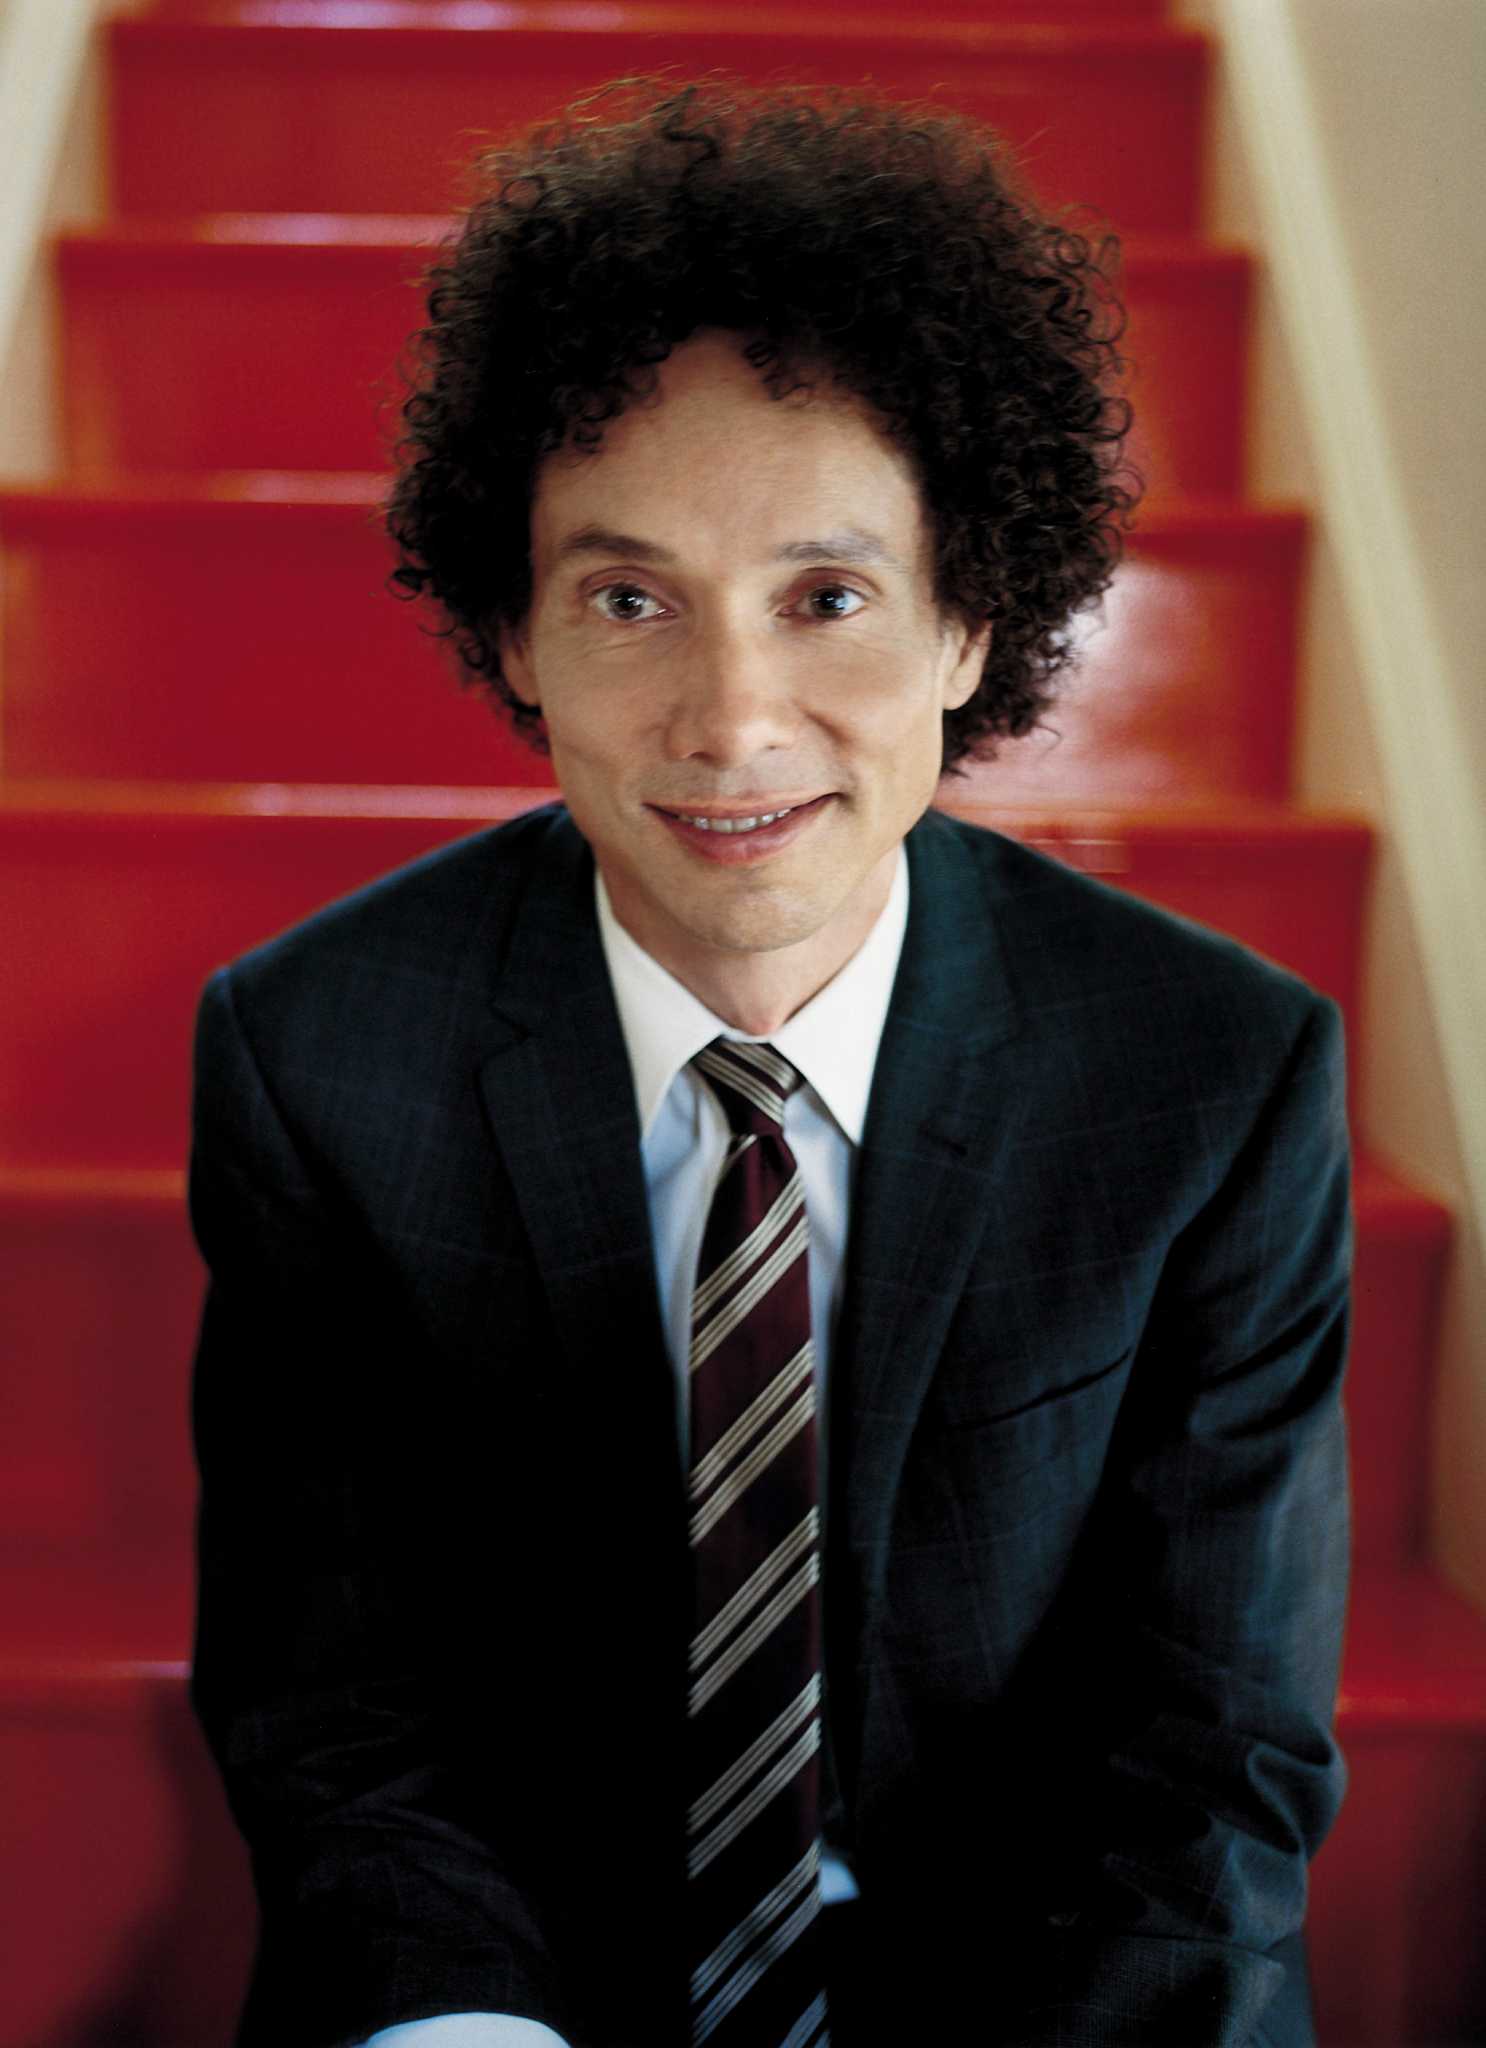 Malcolm Gladwell talk about his return to faith - Houston Chronicle